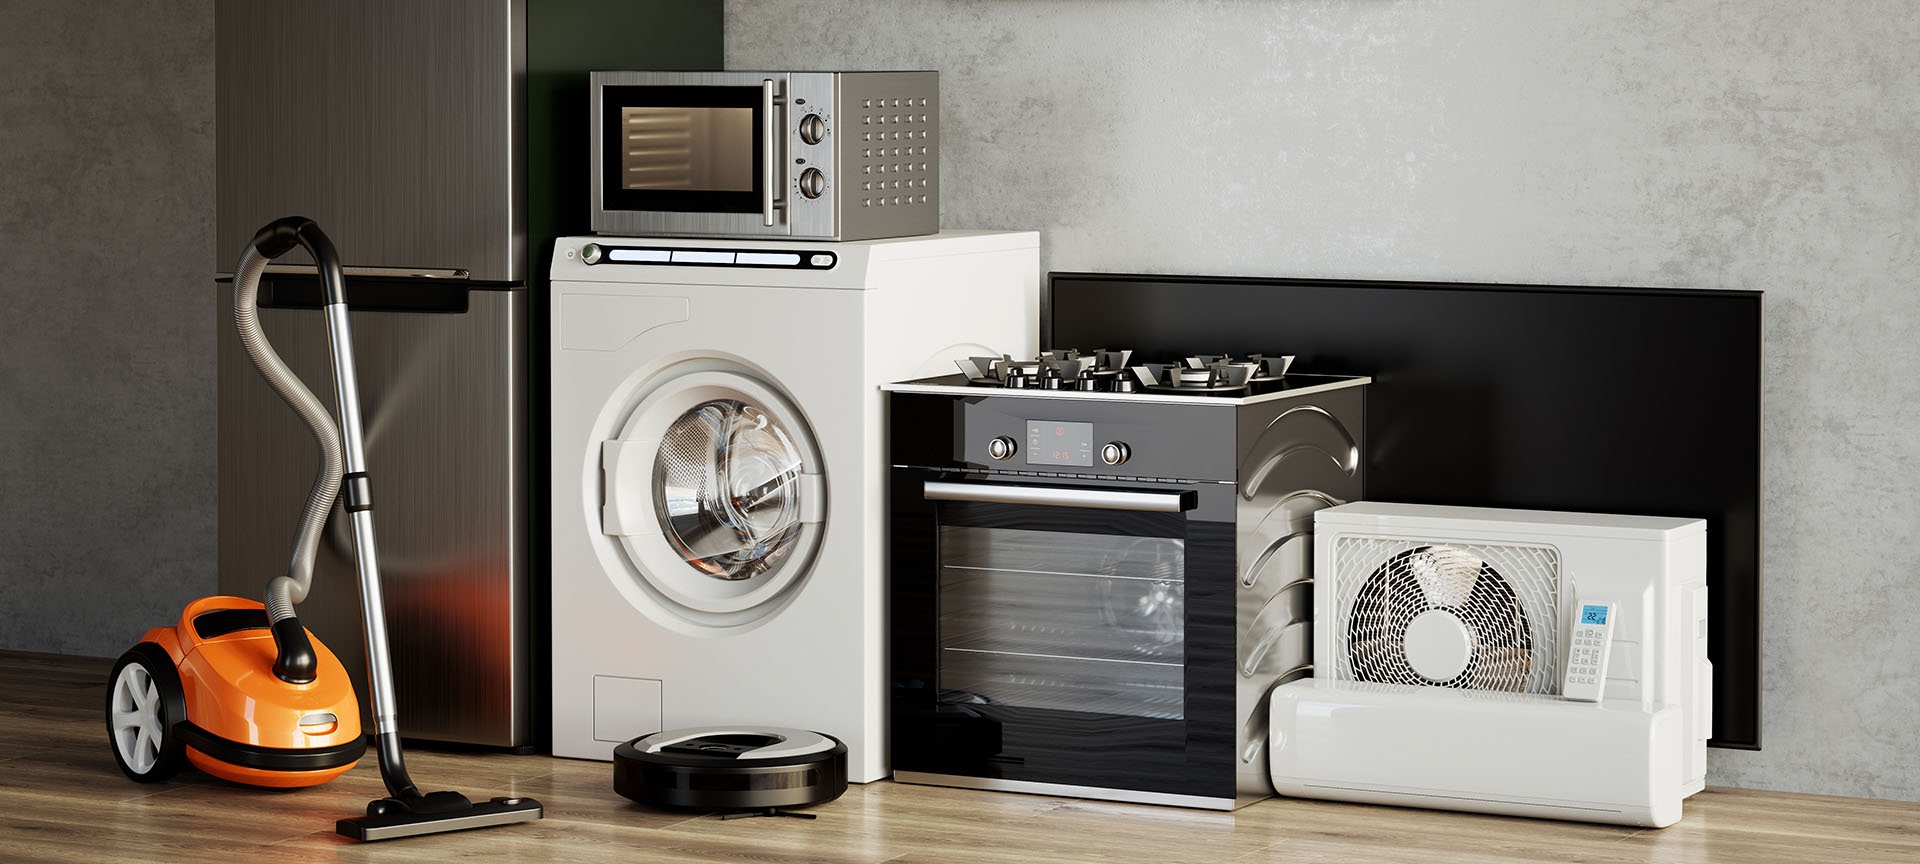 major types of home appliances